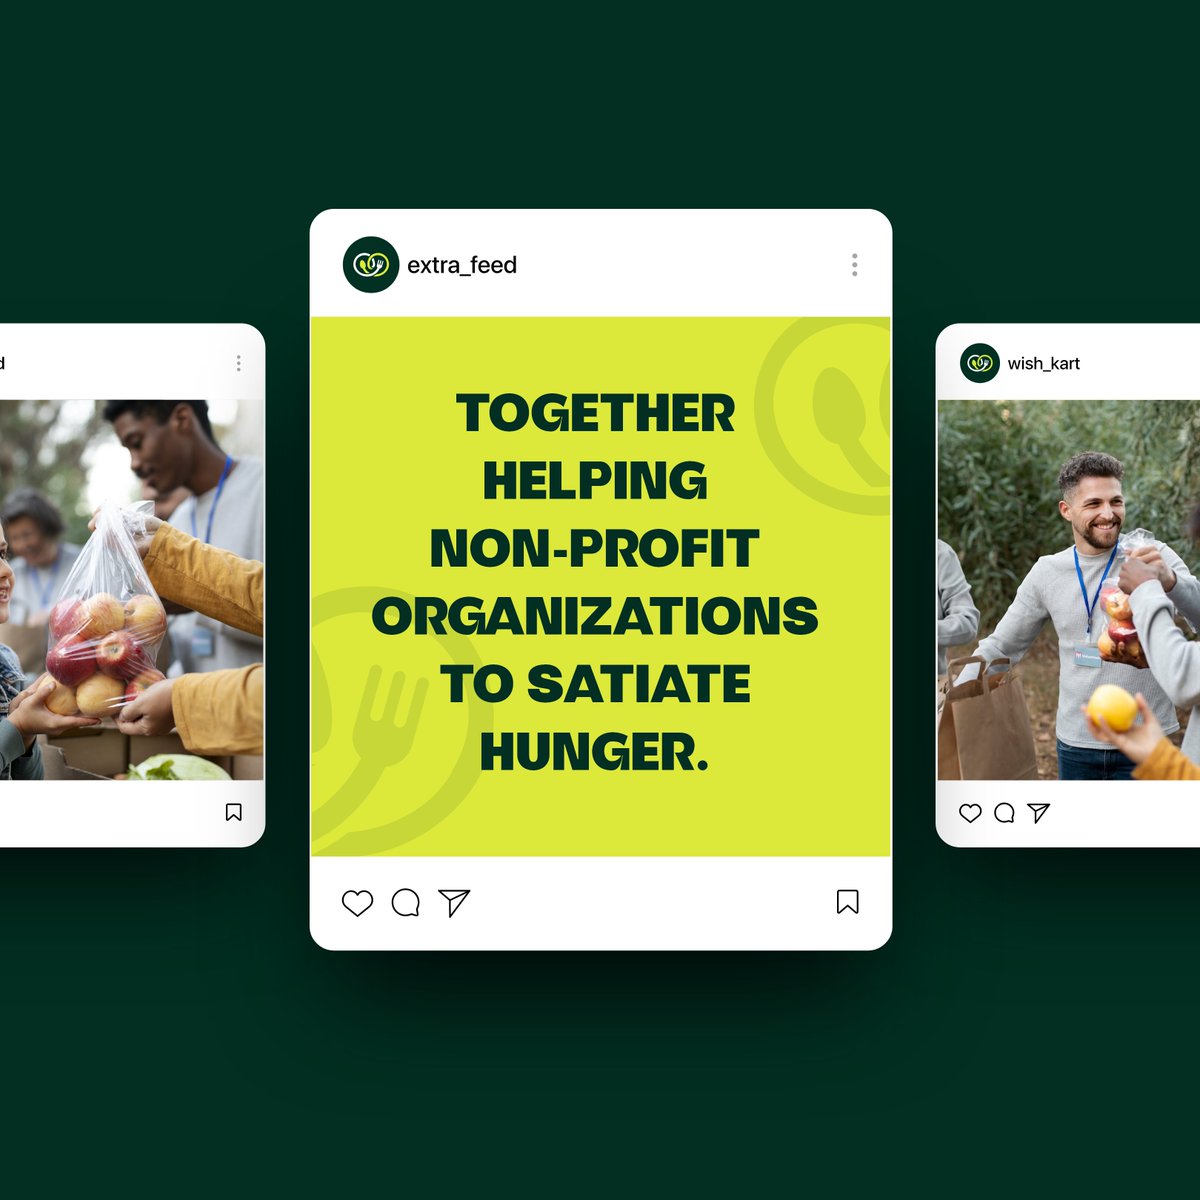 Get ready to donate extra food from your plate. Introducing striking UI, designed to find, donate and track food delivery to needy people.

For more info, mail us at info@codiant.com or visit: uplabs.com/posts/extra-fe…

#fooddonation #fooddeliveryapp  #uiuxdesign #uplabs